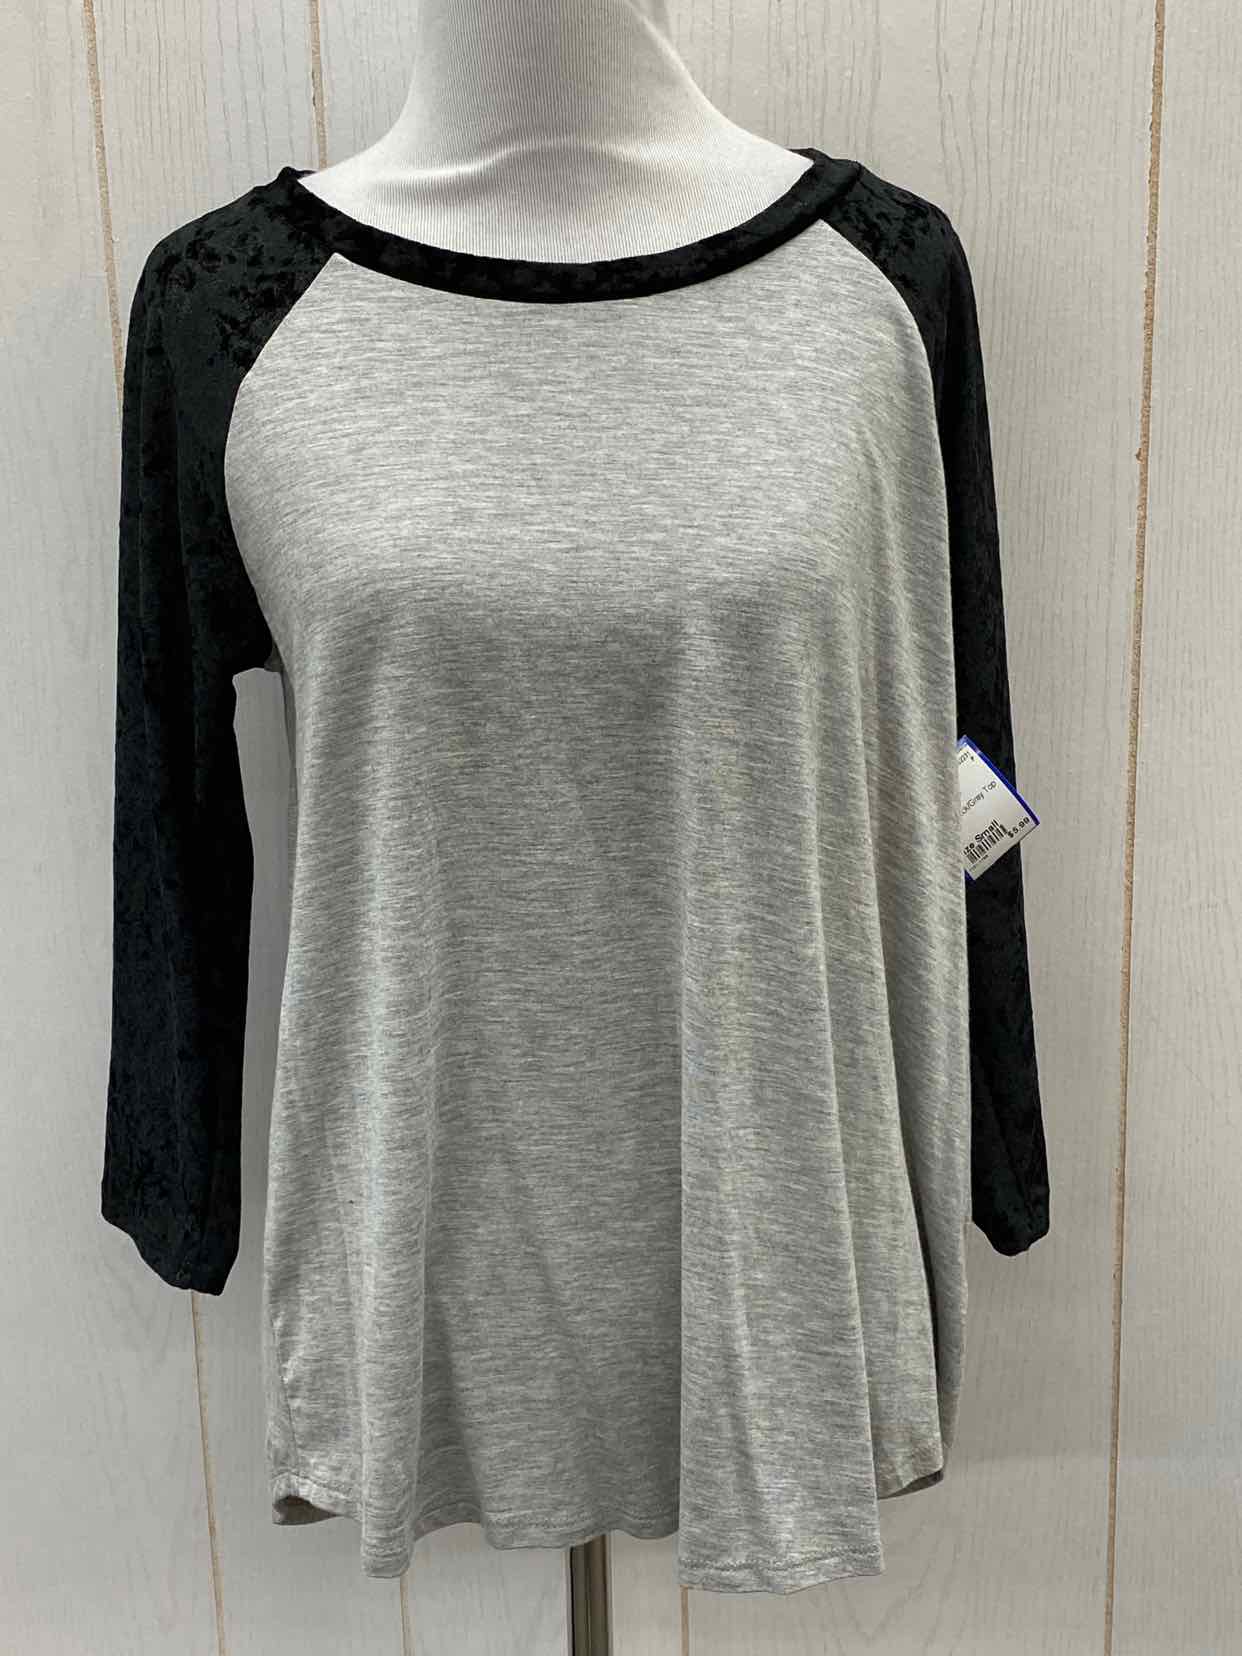 Maurices Black Womens Size Small Shirt